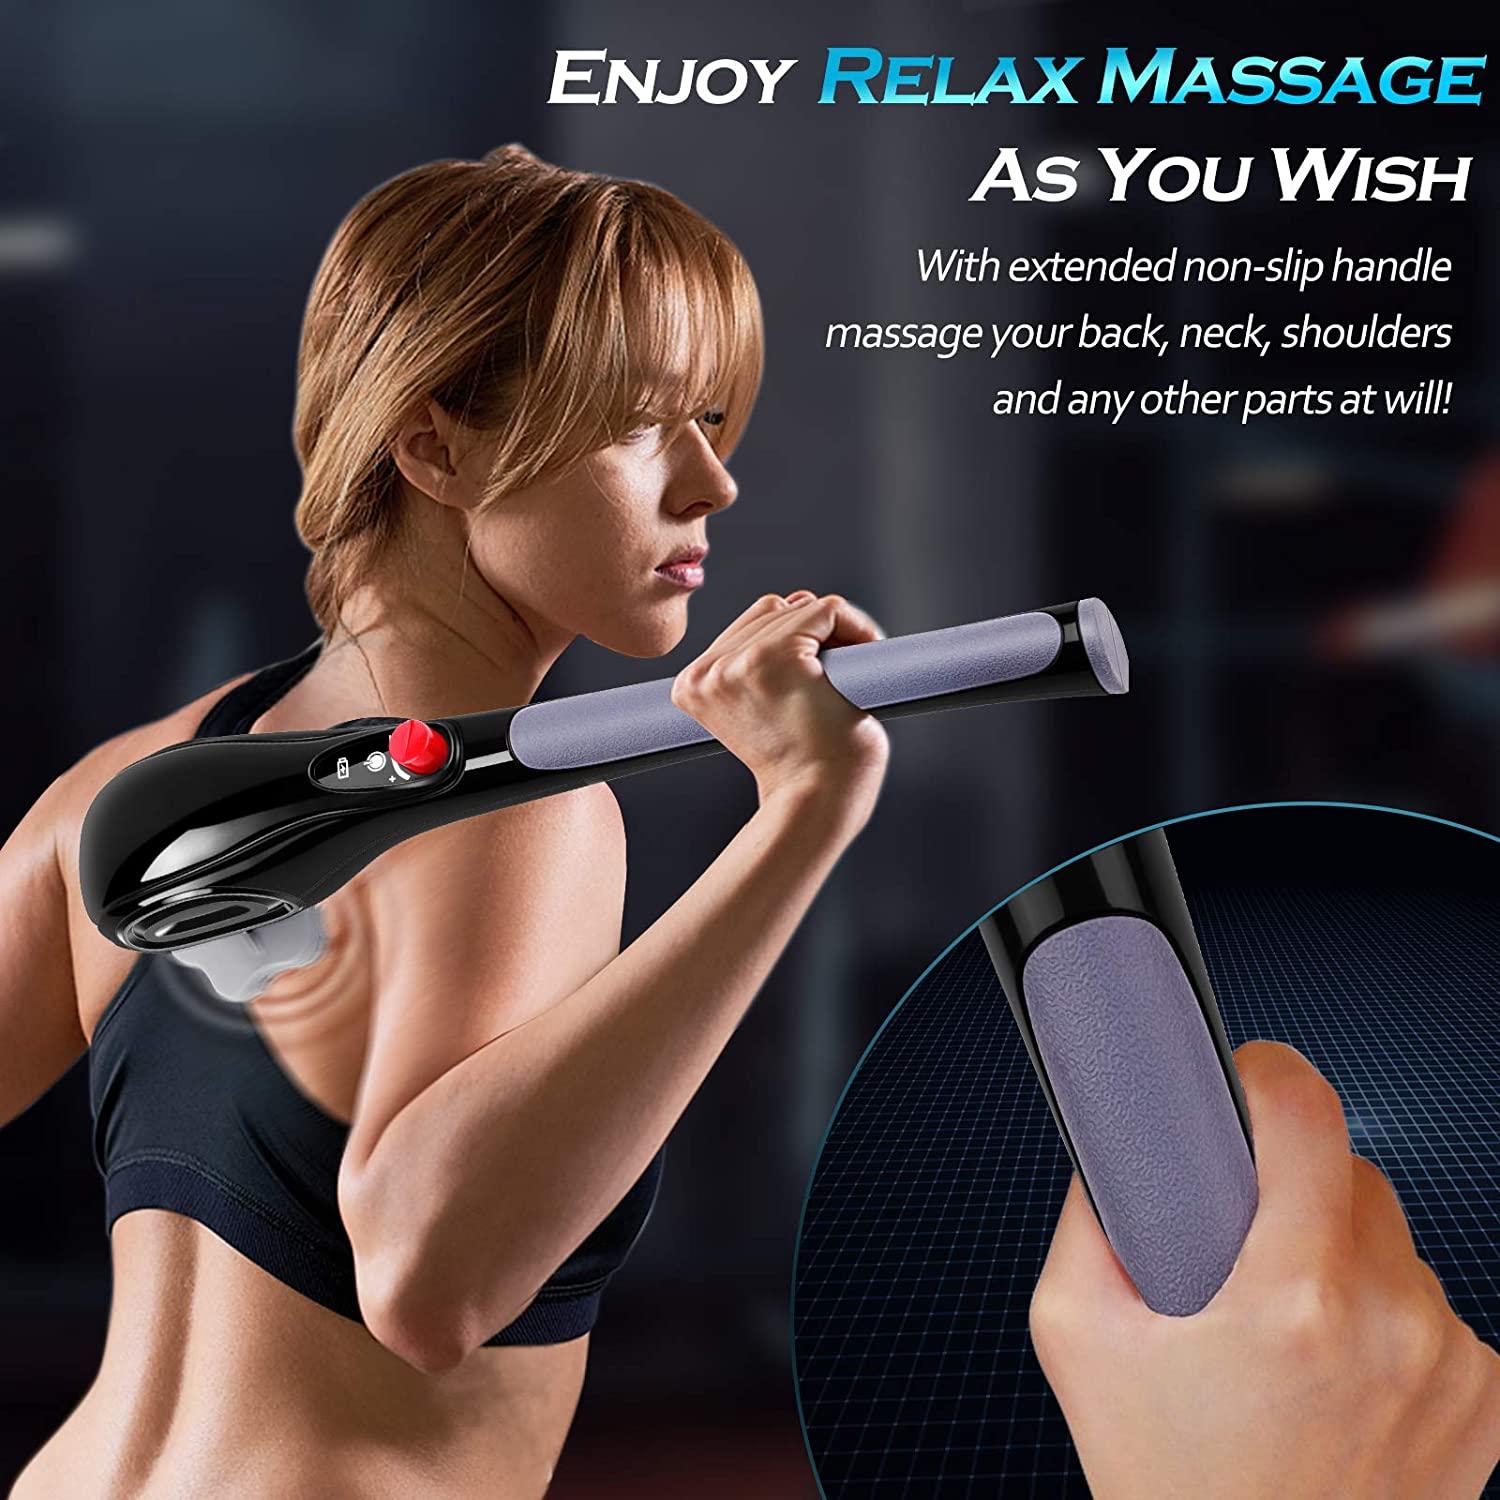 Back Massager Handheld Cordless,VALGELUIK Deep Tissue Massage Gifts for  Women/Men/Mom/Dad,Electric Percussion Massager for Neck,Back,Shoulder,Foot,Leg,Body  Muscles Pain Relief Dark Gray